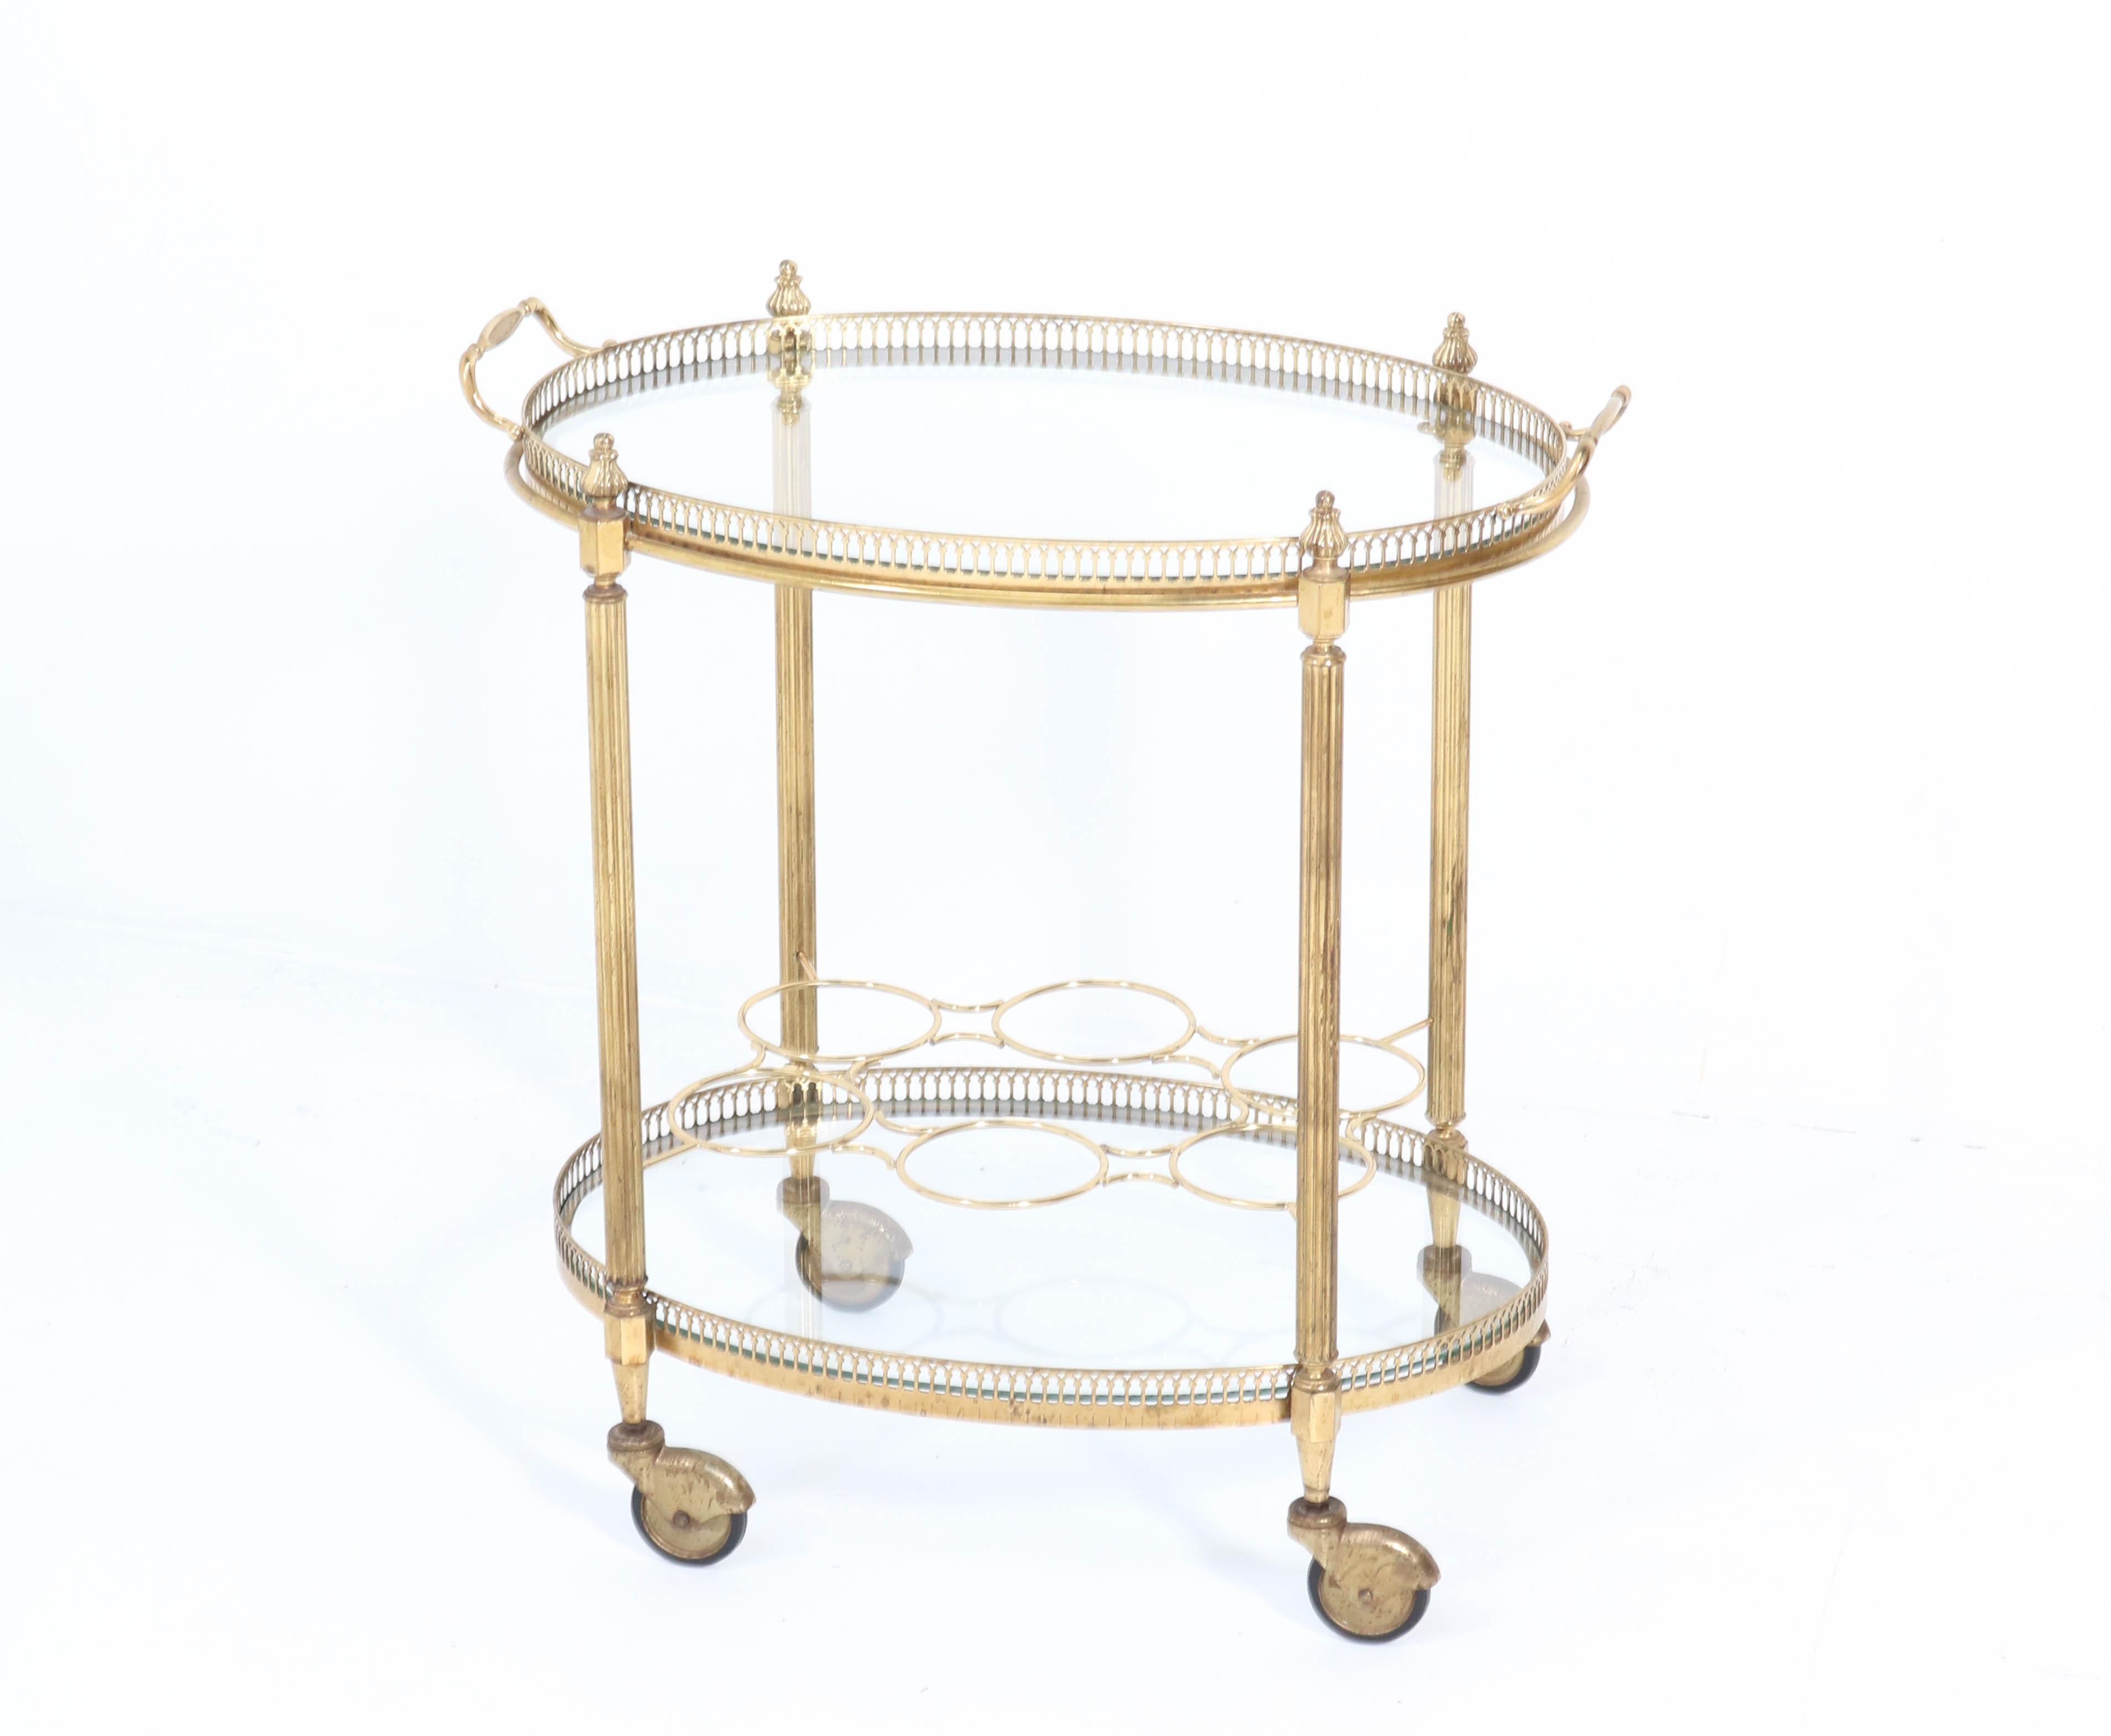 Stunning Hollywood Regency serving trolley.
Design attributed to Maison Jansen.
Striking French design from the 1950s.
Brass frame with original glass.
The top shelf can be used as a serving tray.
In good original condition with minor wear